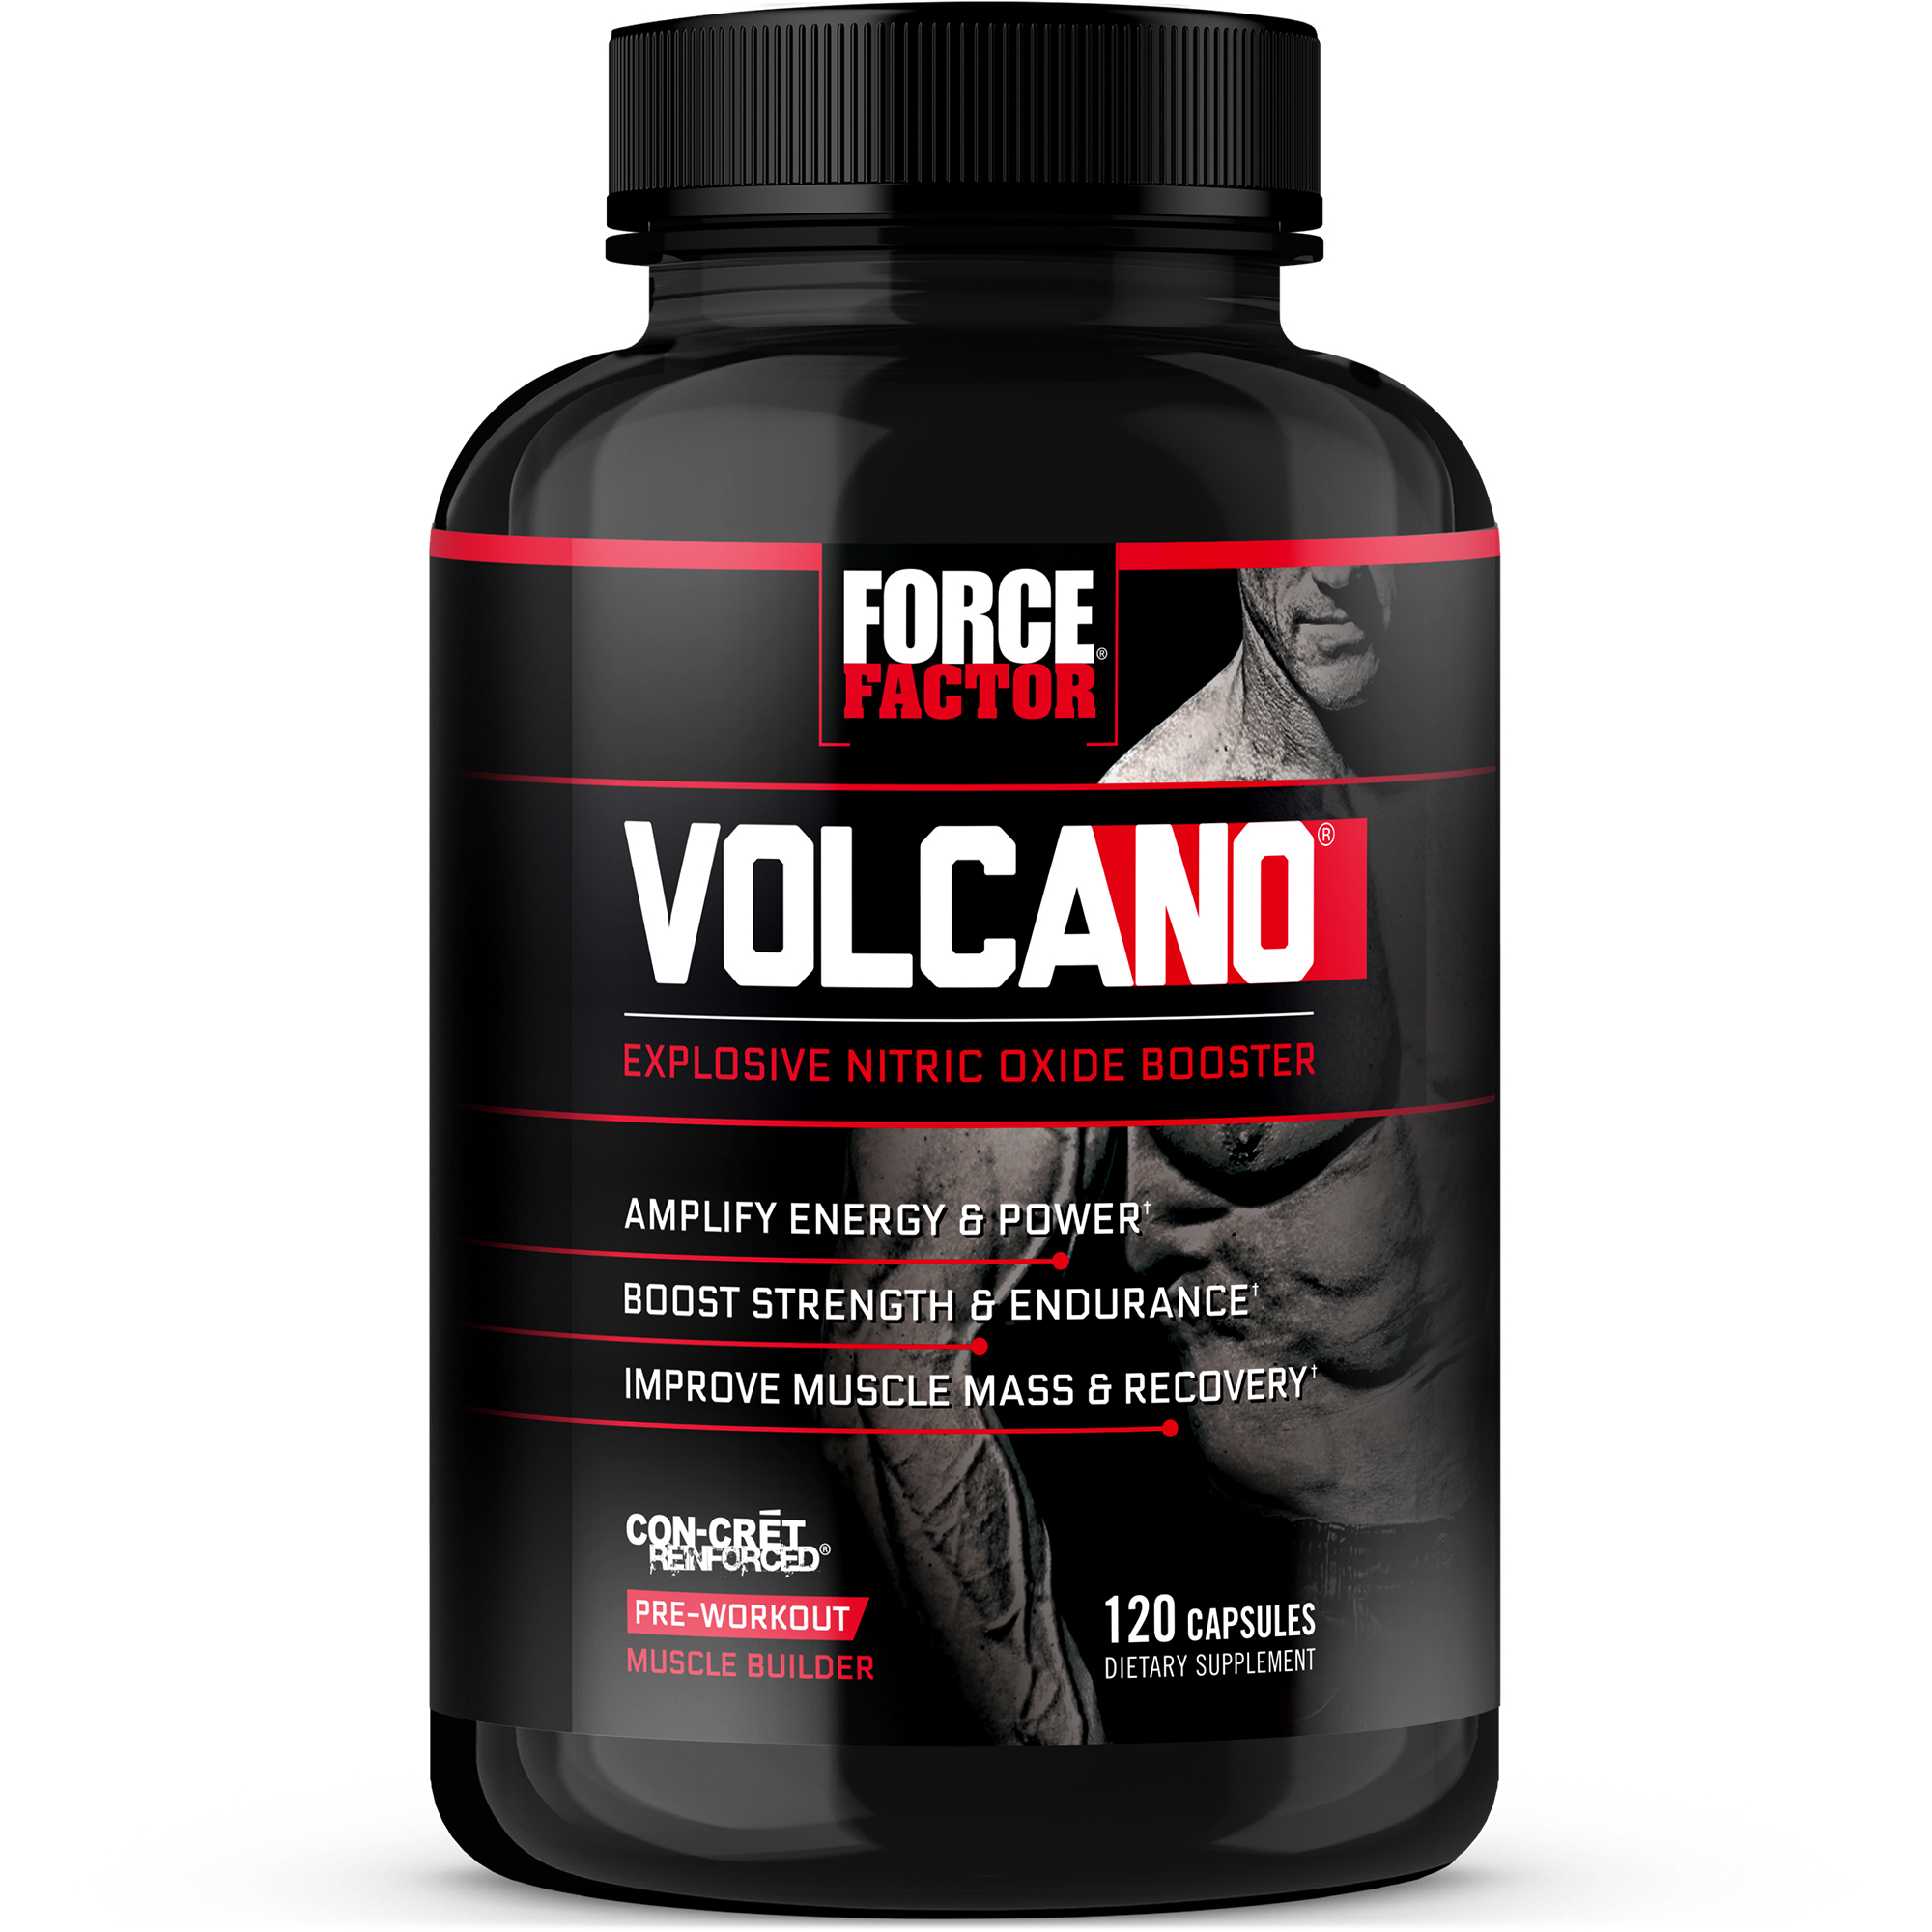 Force Factor Volcano Pre-Workout Nitric Oxide Booster Supplement for Men, 120 Capsules - image 1 of 10